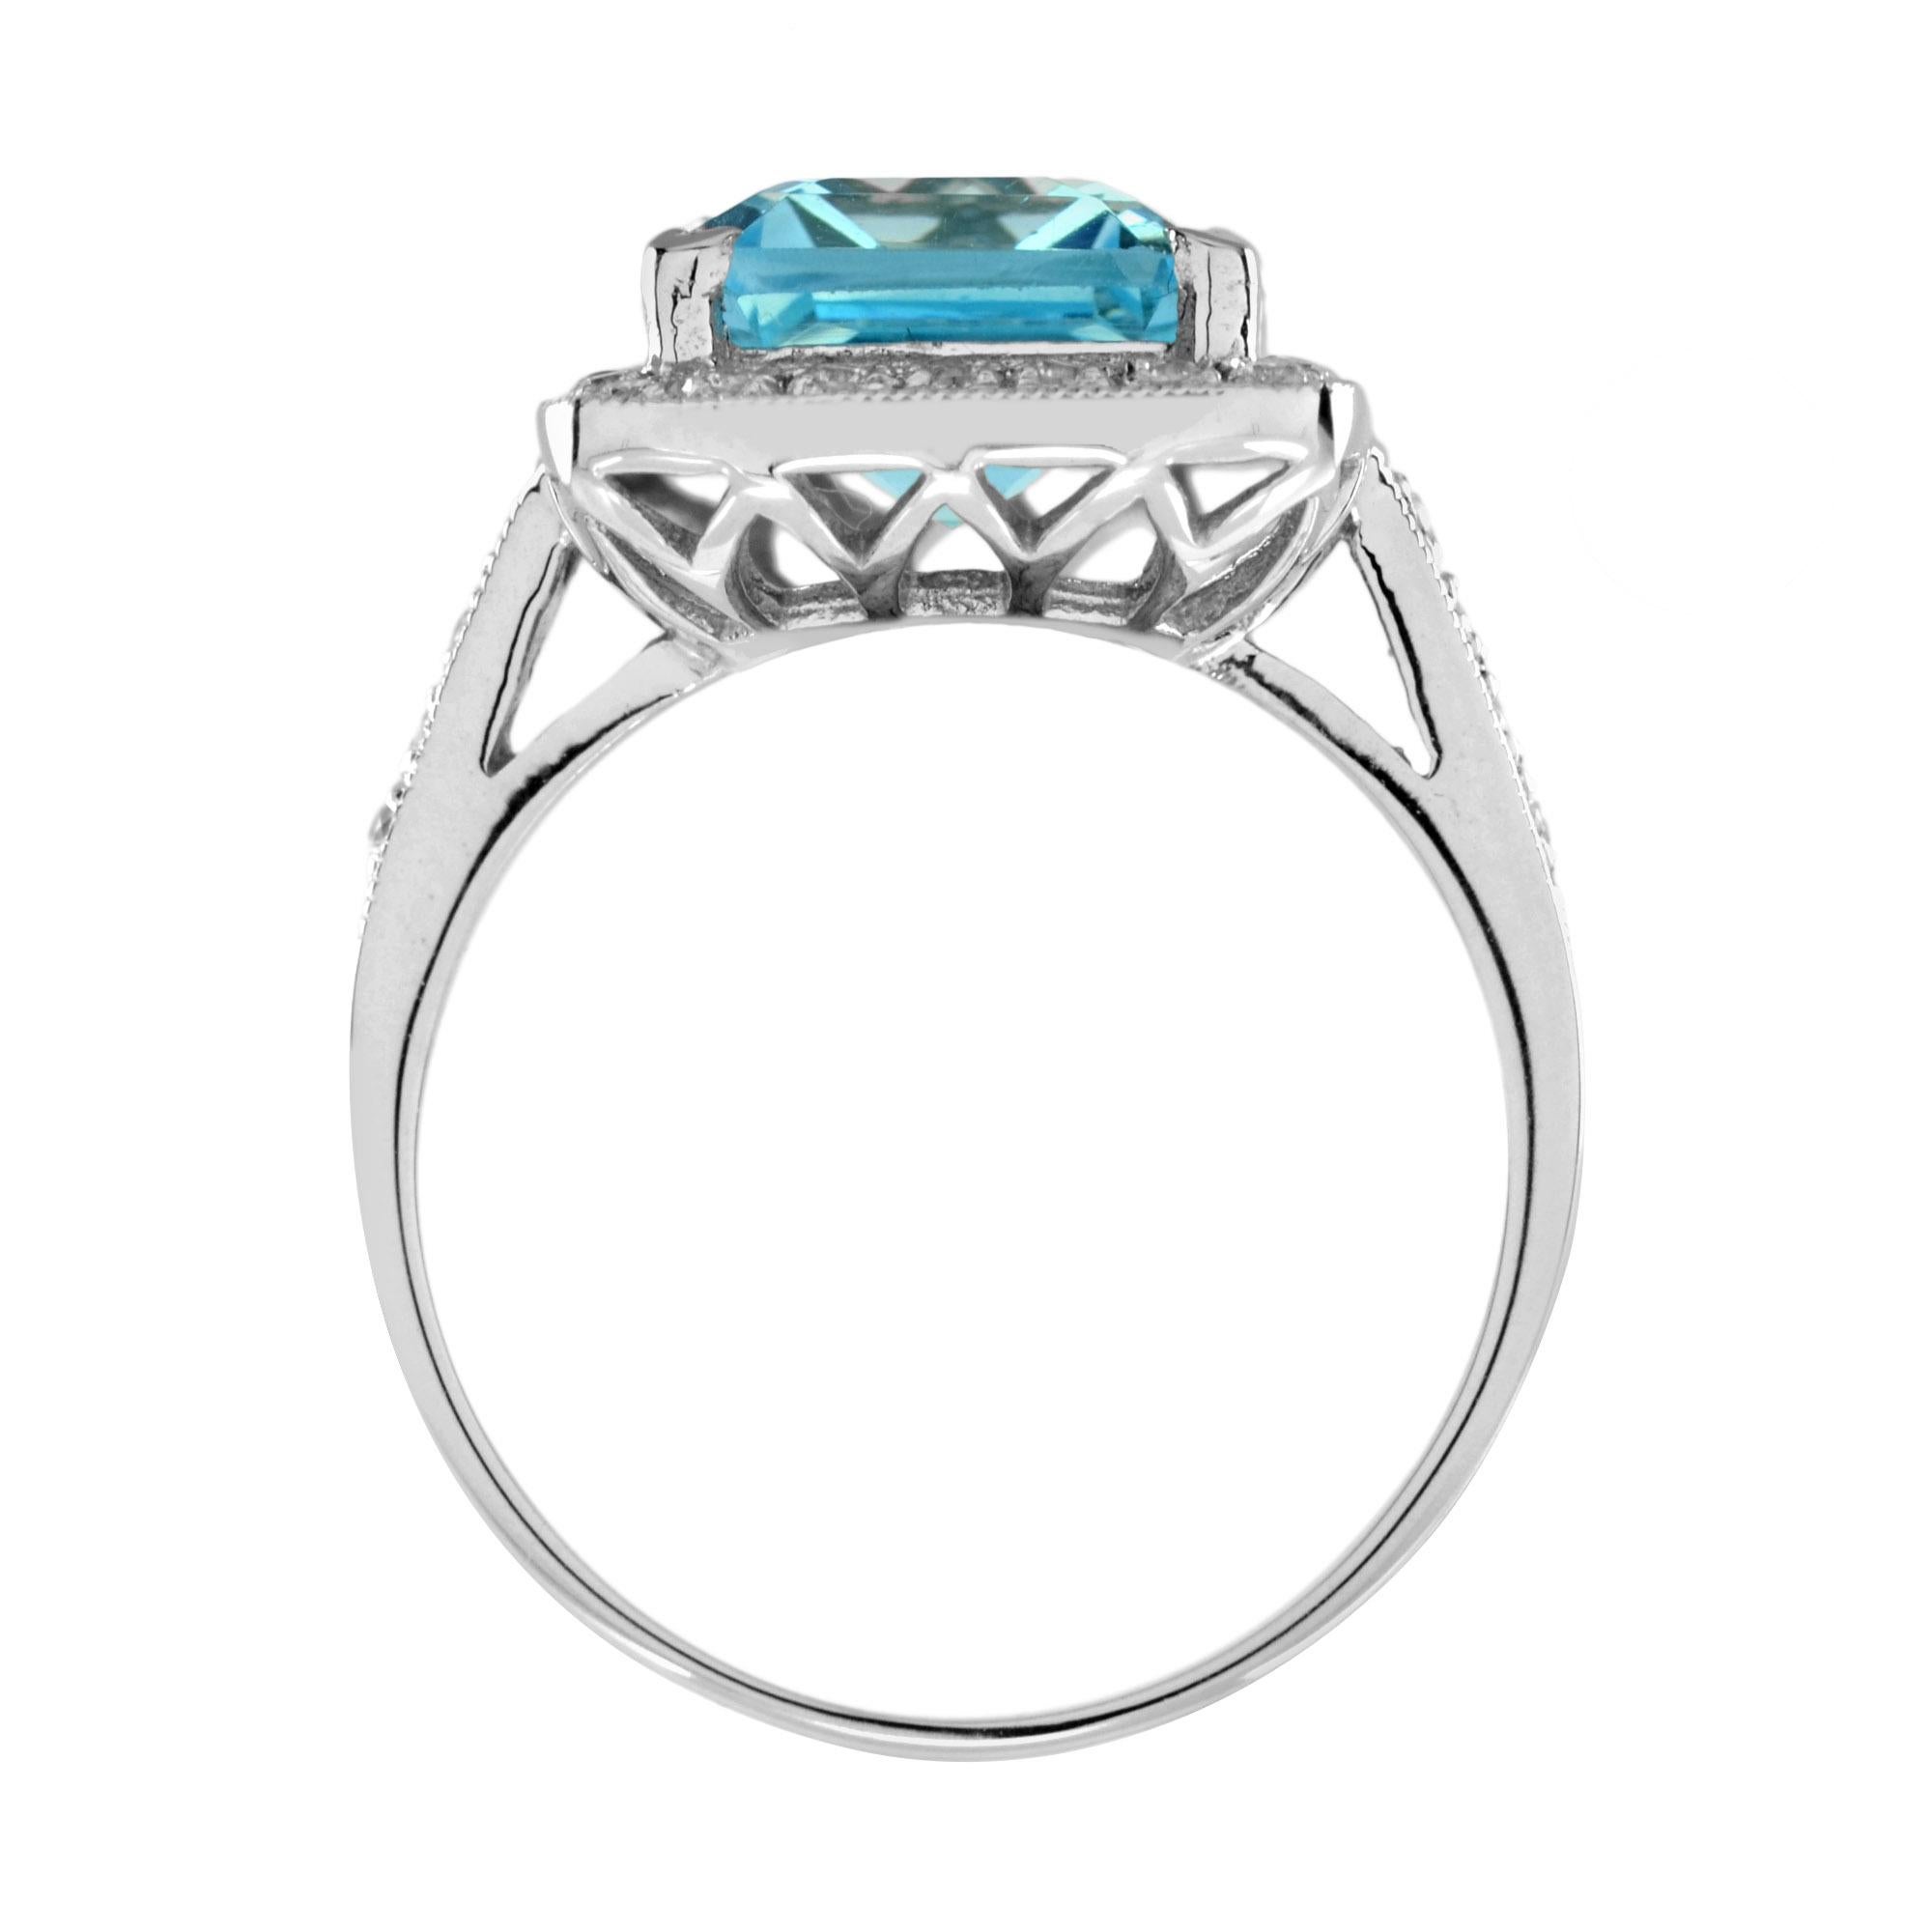 For Sale:  Halona Art Deco Style Emerald Cut Blue Topaz with Diamond Engagement Ring 5